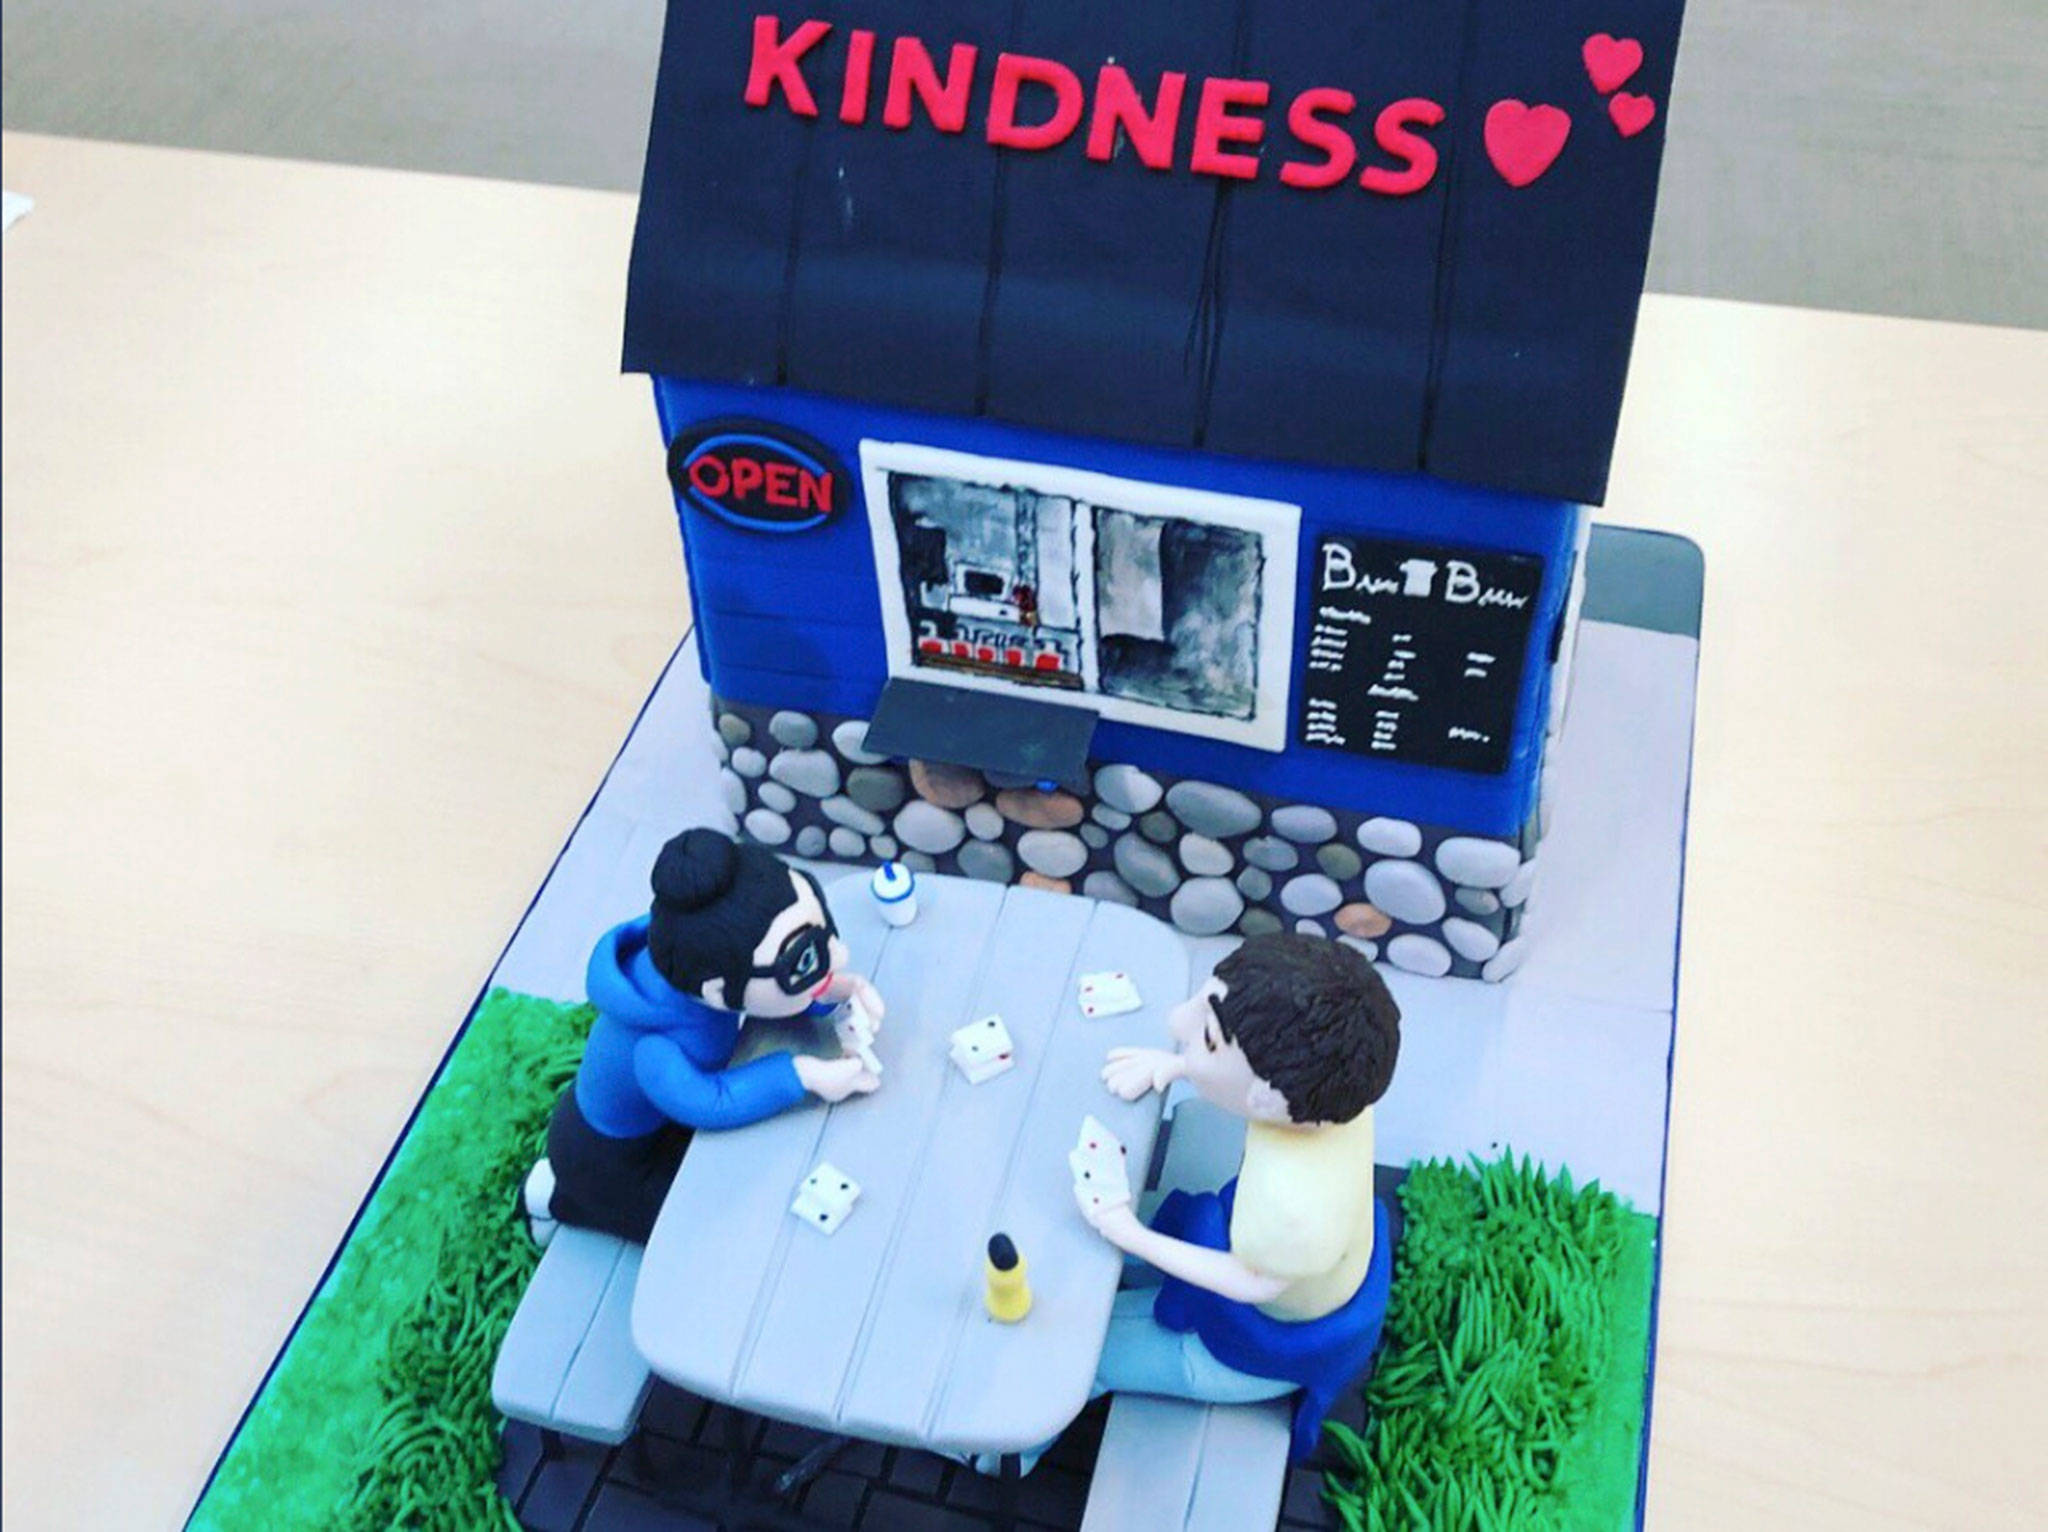 The city celebrated its “Cup of Kindness” proclamation with a cake based on Beca’s Brew in Bothell. Photo via Twitter